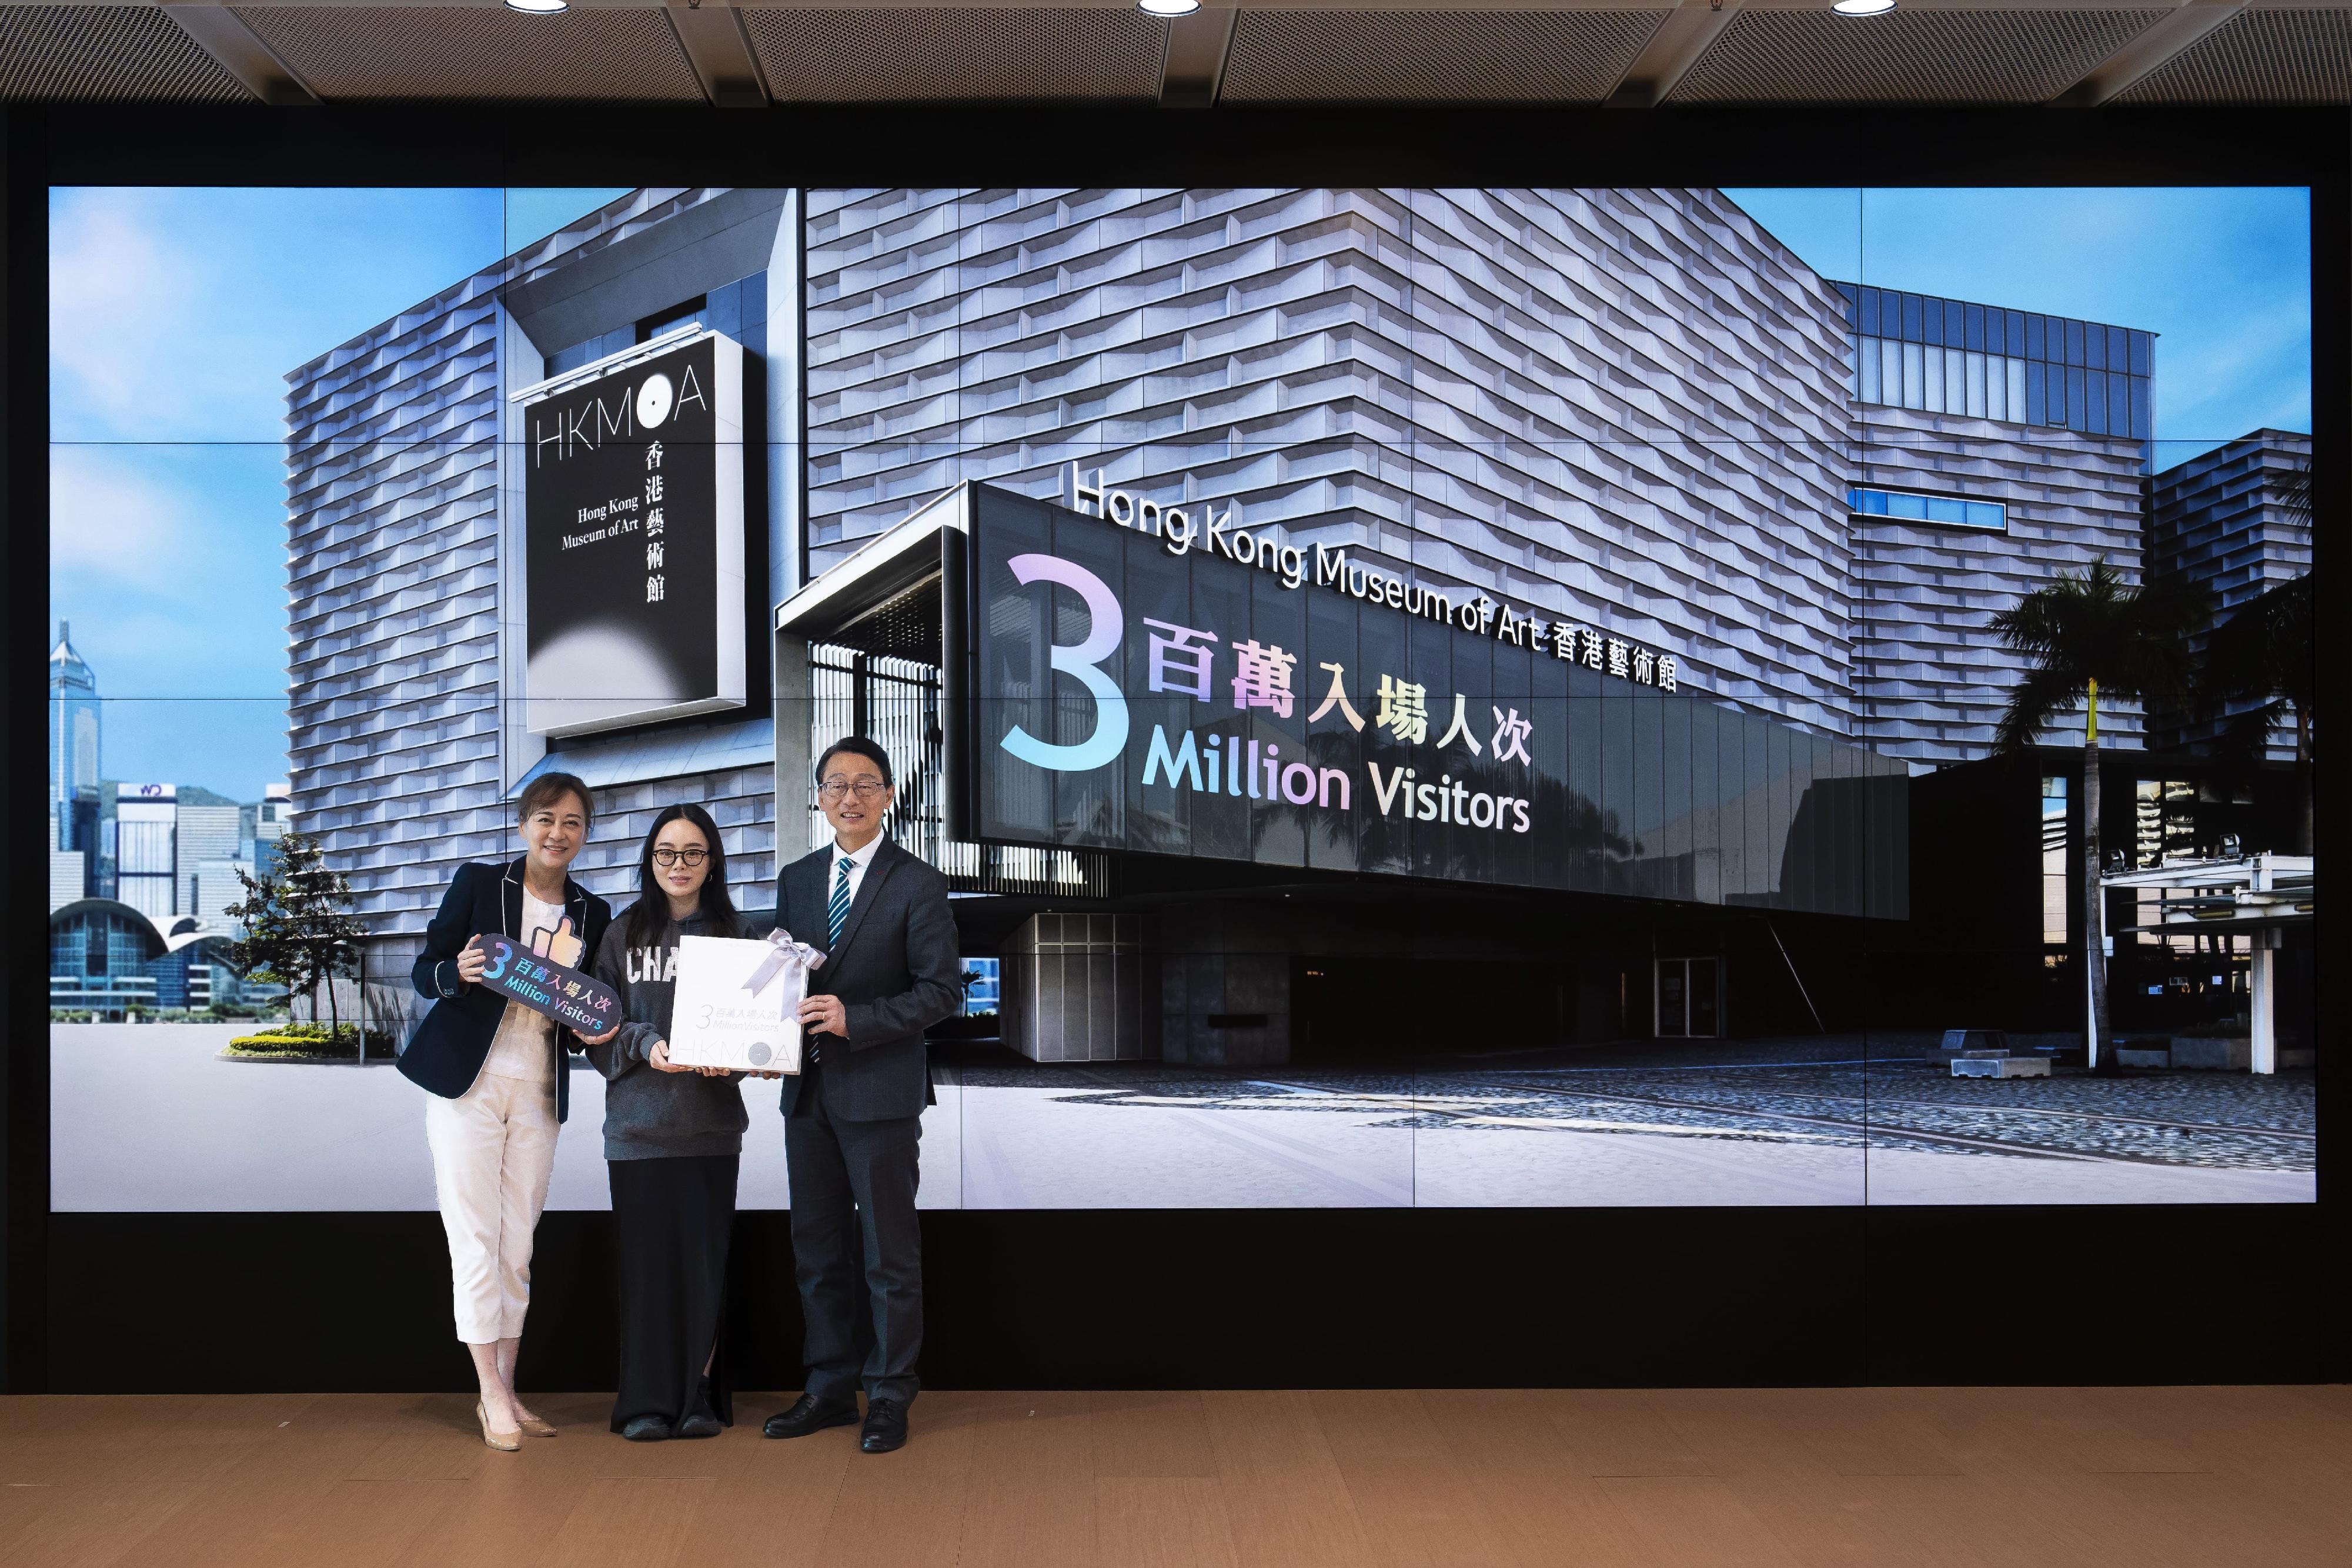 The Hong Kong Museum of Art (HKMoA) of the Leisure and Cultural Services Department has been popular among the local public and tourists. The number of visitors has reached a new high since its reopening after a major renovation in 2019. The HKMoA welcomed its 3 000 000th visitor yesterday (March 6). Picture shows the Director of Leisure and Cultural Services, Mr Vincent Liu (right), and the Museum Director of the HKMoA, Dr Maria Mok (left), welcoming the 3 000 000th visitor and presenting to the visitor a porcelain plate designed with the HKMoA's collection.